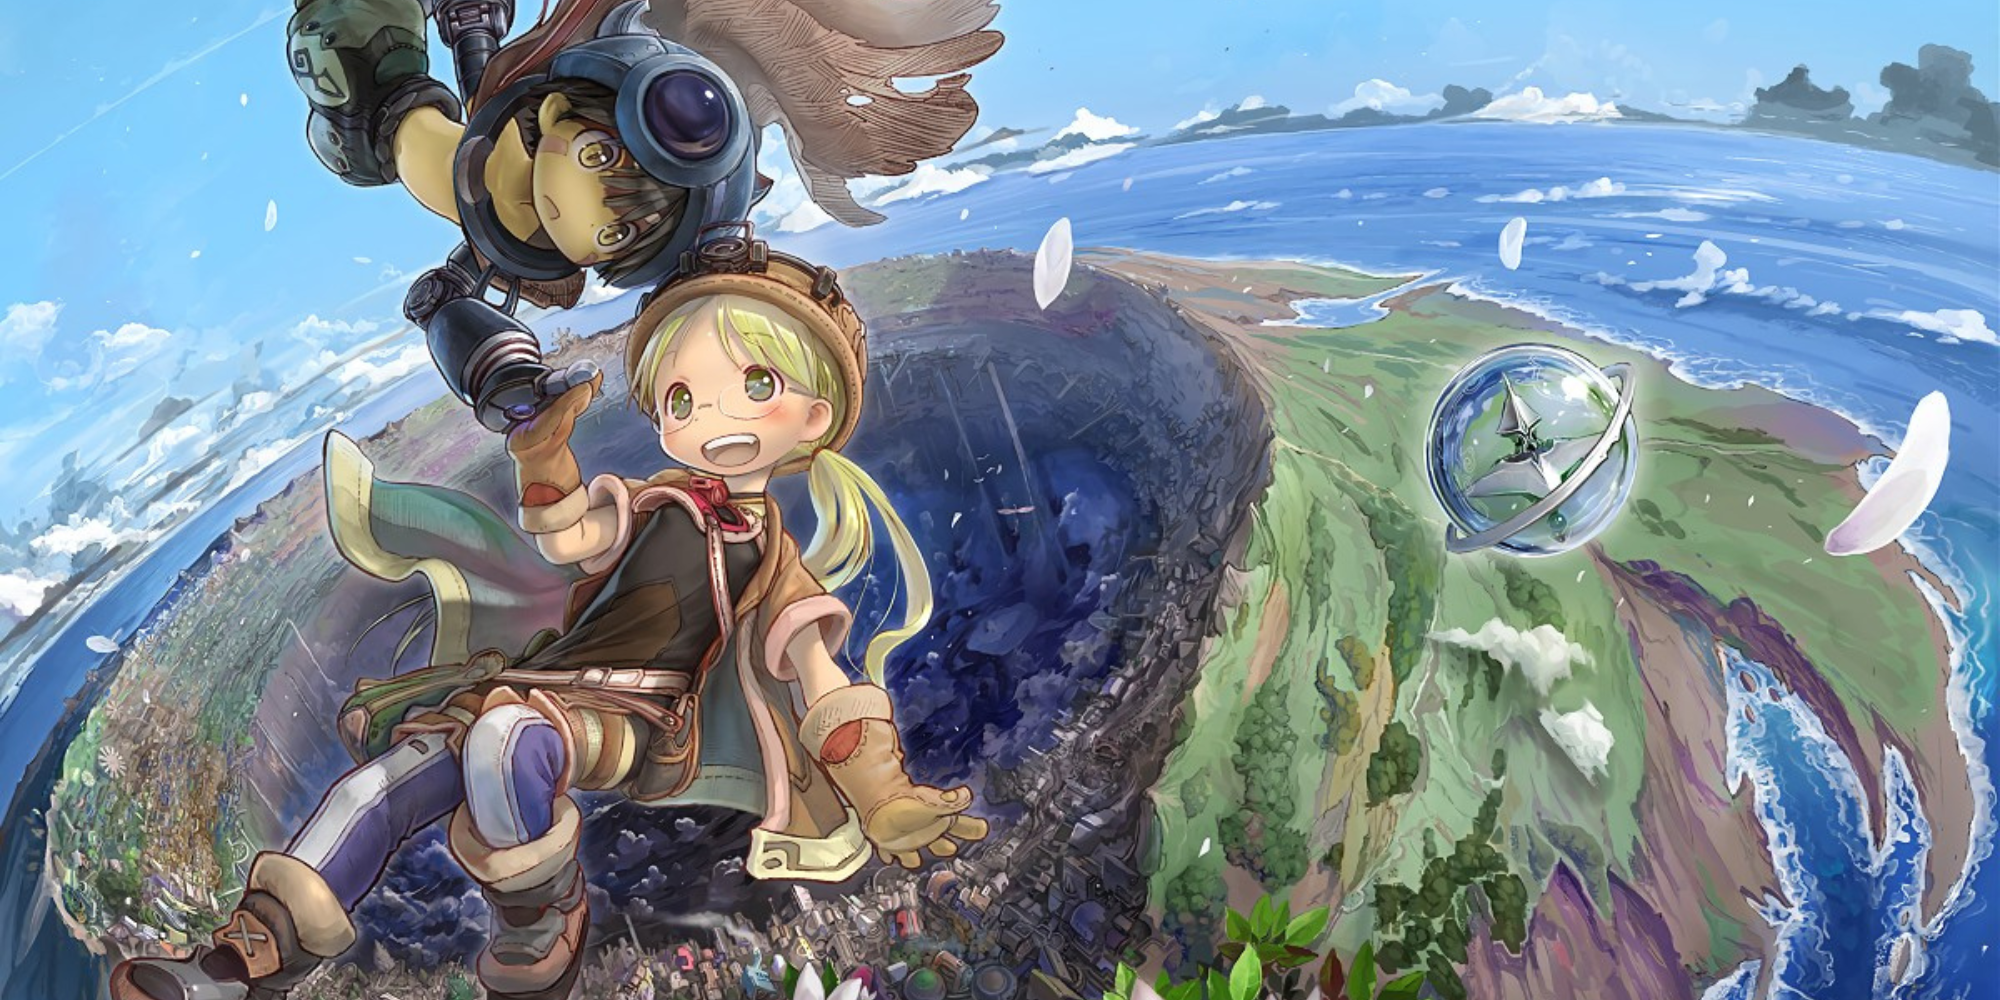 Made in Abyss Season 2 TV Anime Announced for 2022